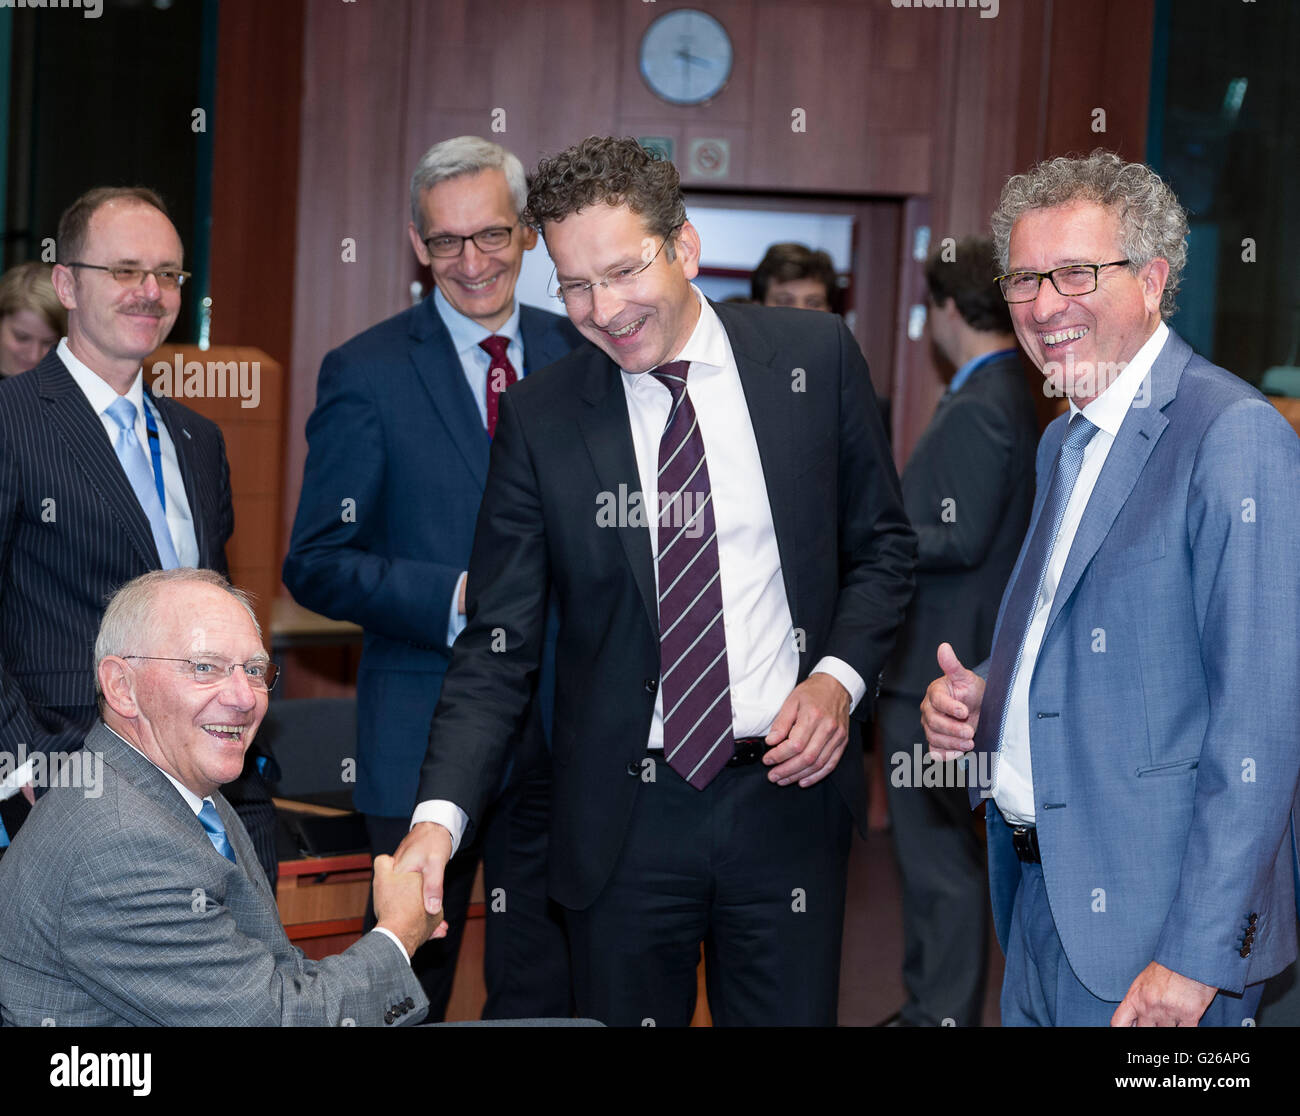 Brussels, Belgium. 24th May, 2016. From Left: German Finance Minister Wolfgang Schaeuble is talking with the Dutch Minister of Finance, President of the Council Jeroen Dijsselbloem and the Luxembourg Minister of Finance, Treasury, & Budget Pierre Gramegna prior the start of an · group Ministers meeting in the EU Council HQ. Credit:  dpa picture alliance/Alamy Live News Stock Photo